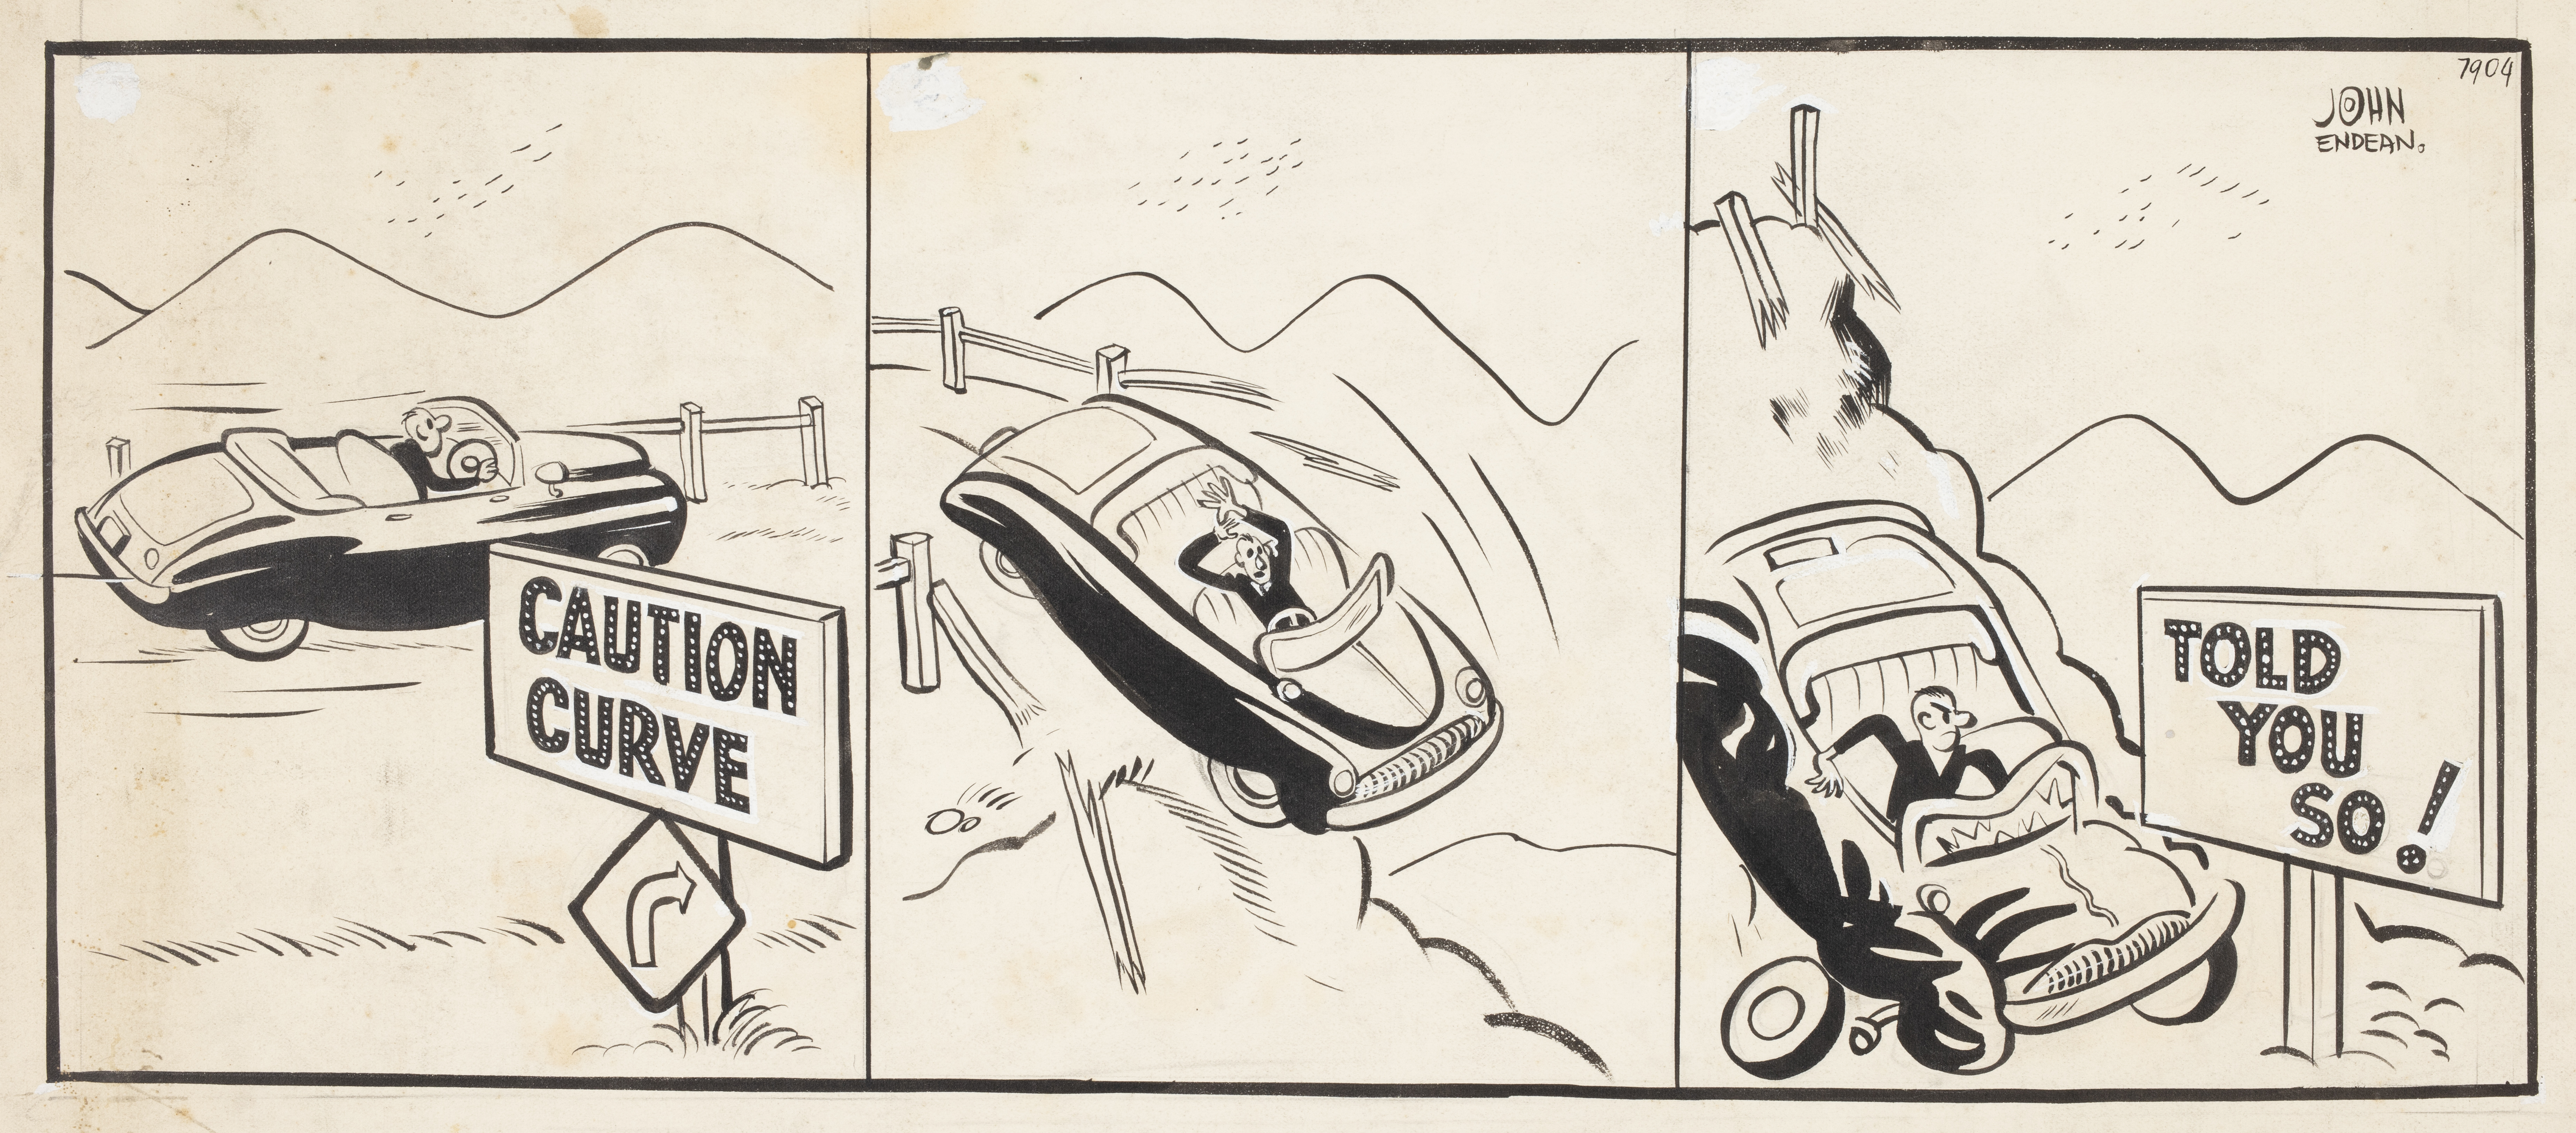 Three panel cartoon. First panel shows a car turning a corner. Sign says 'Caution curve'. Second panel the car is driving through the road barrier, heading off a cliff. Last panel, car is crashed into a sign at the bottom that says 'Told you so'.